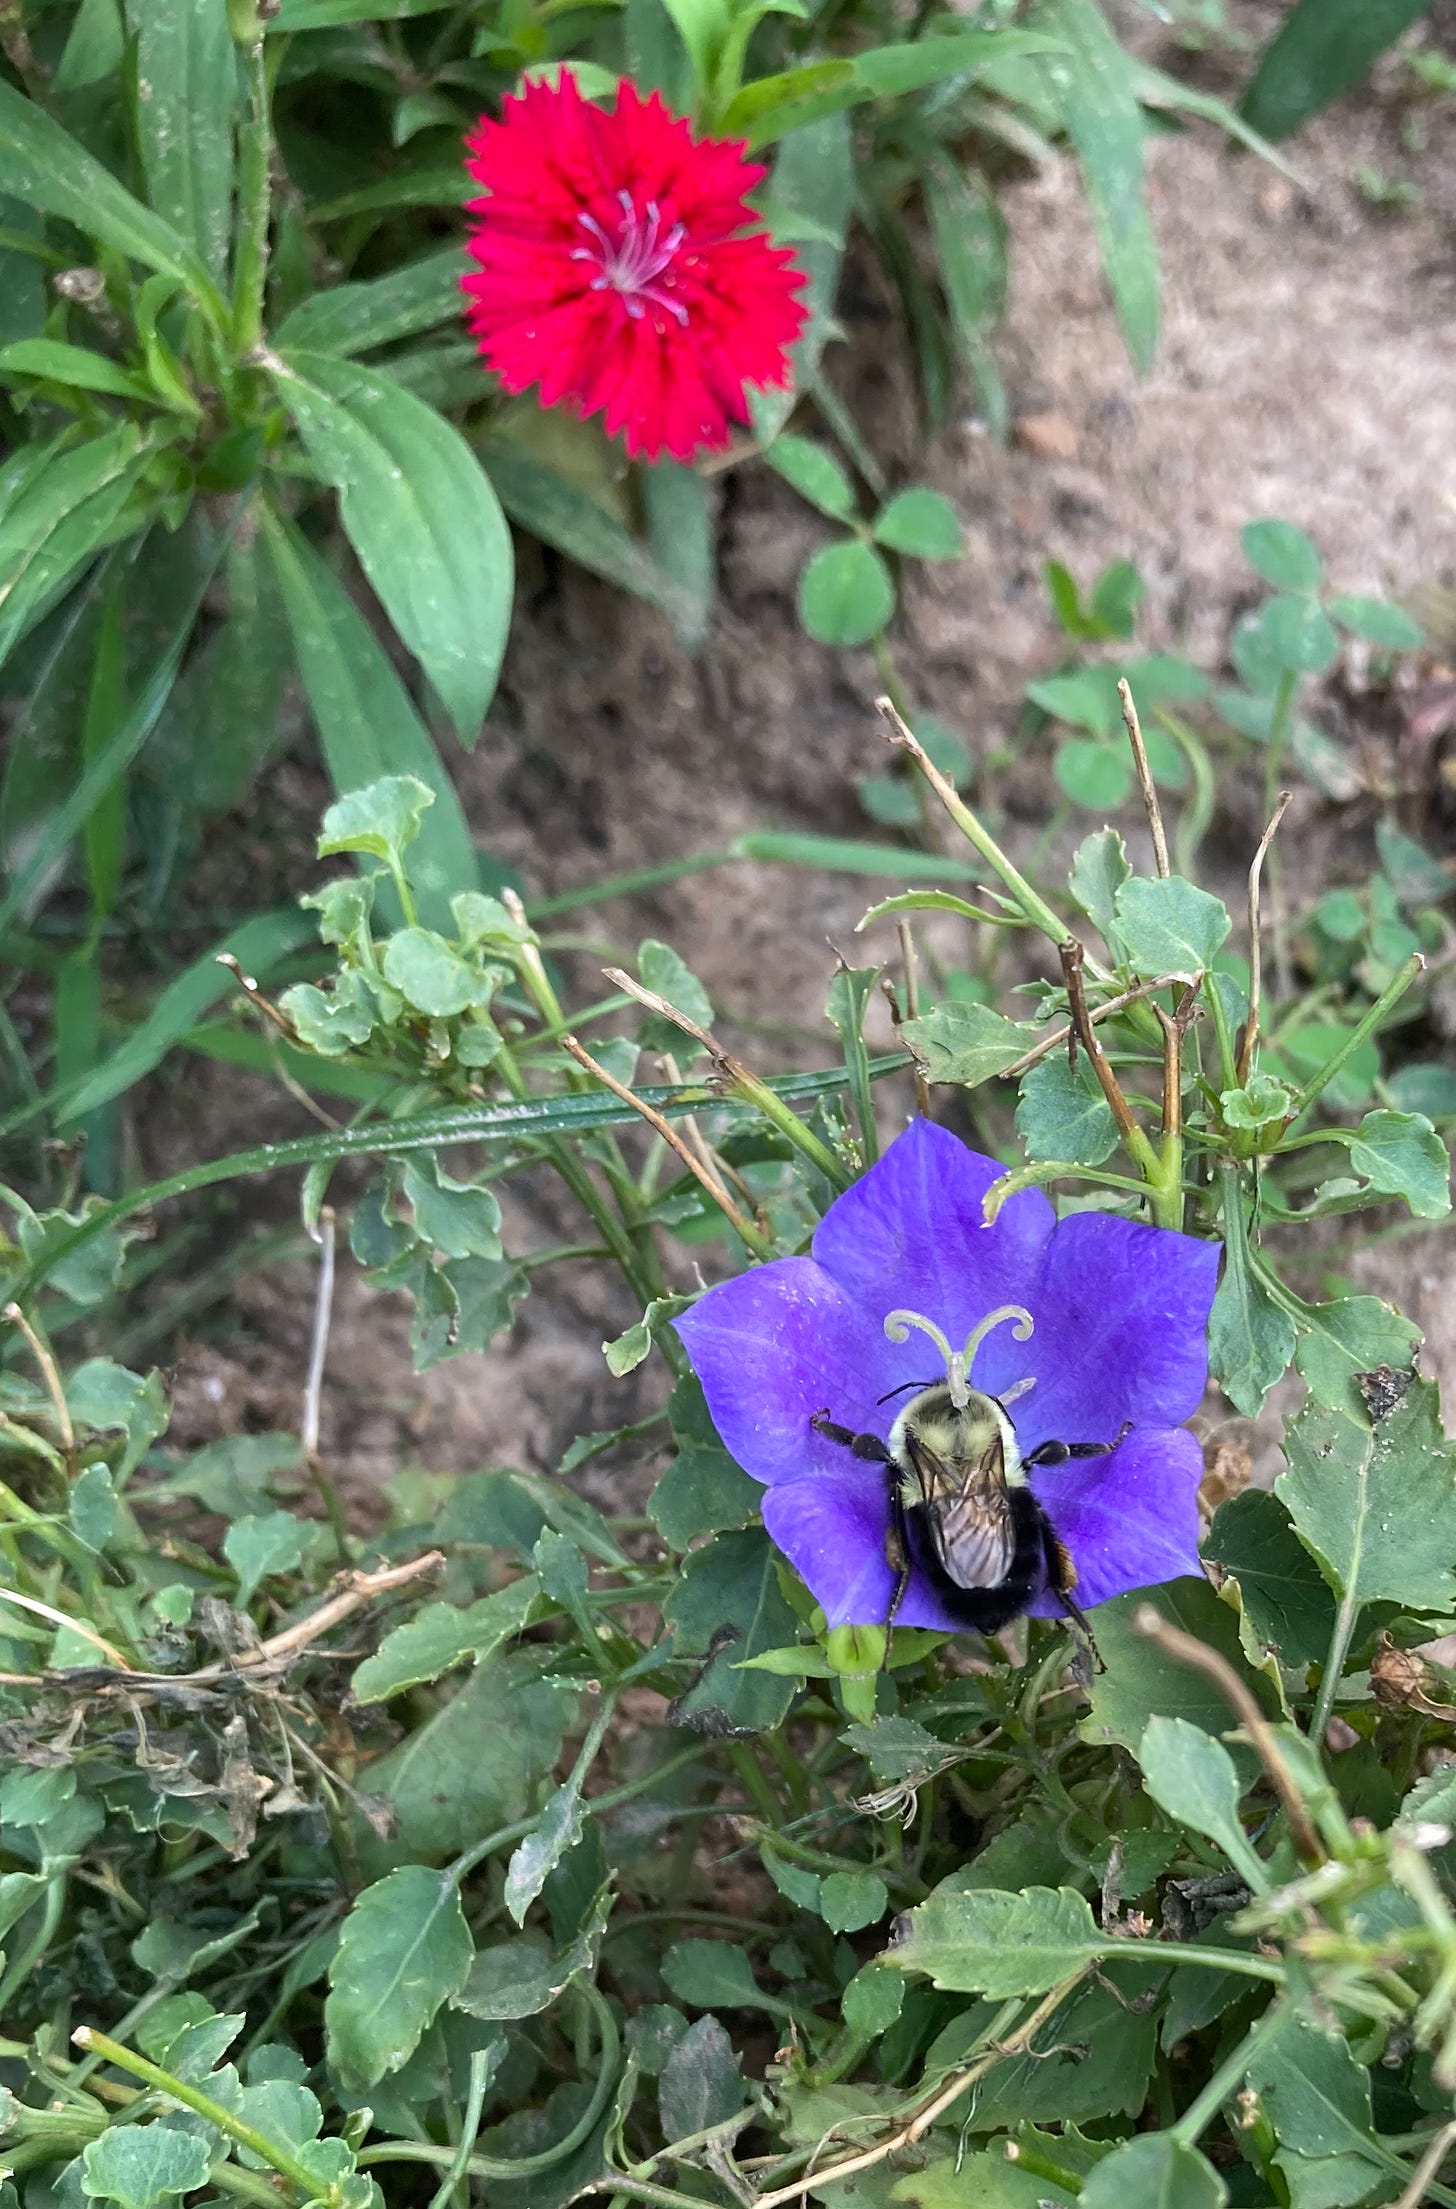 Bumble bee on a Blue Bellflower.